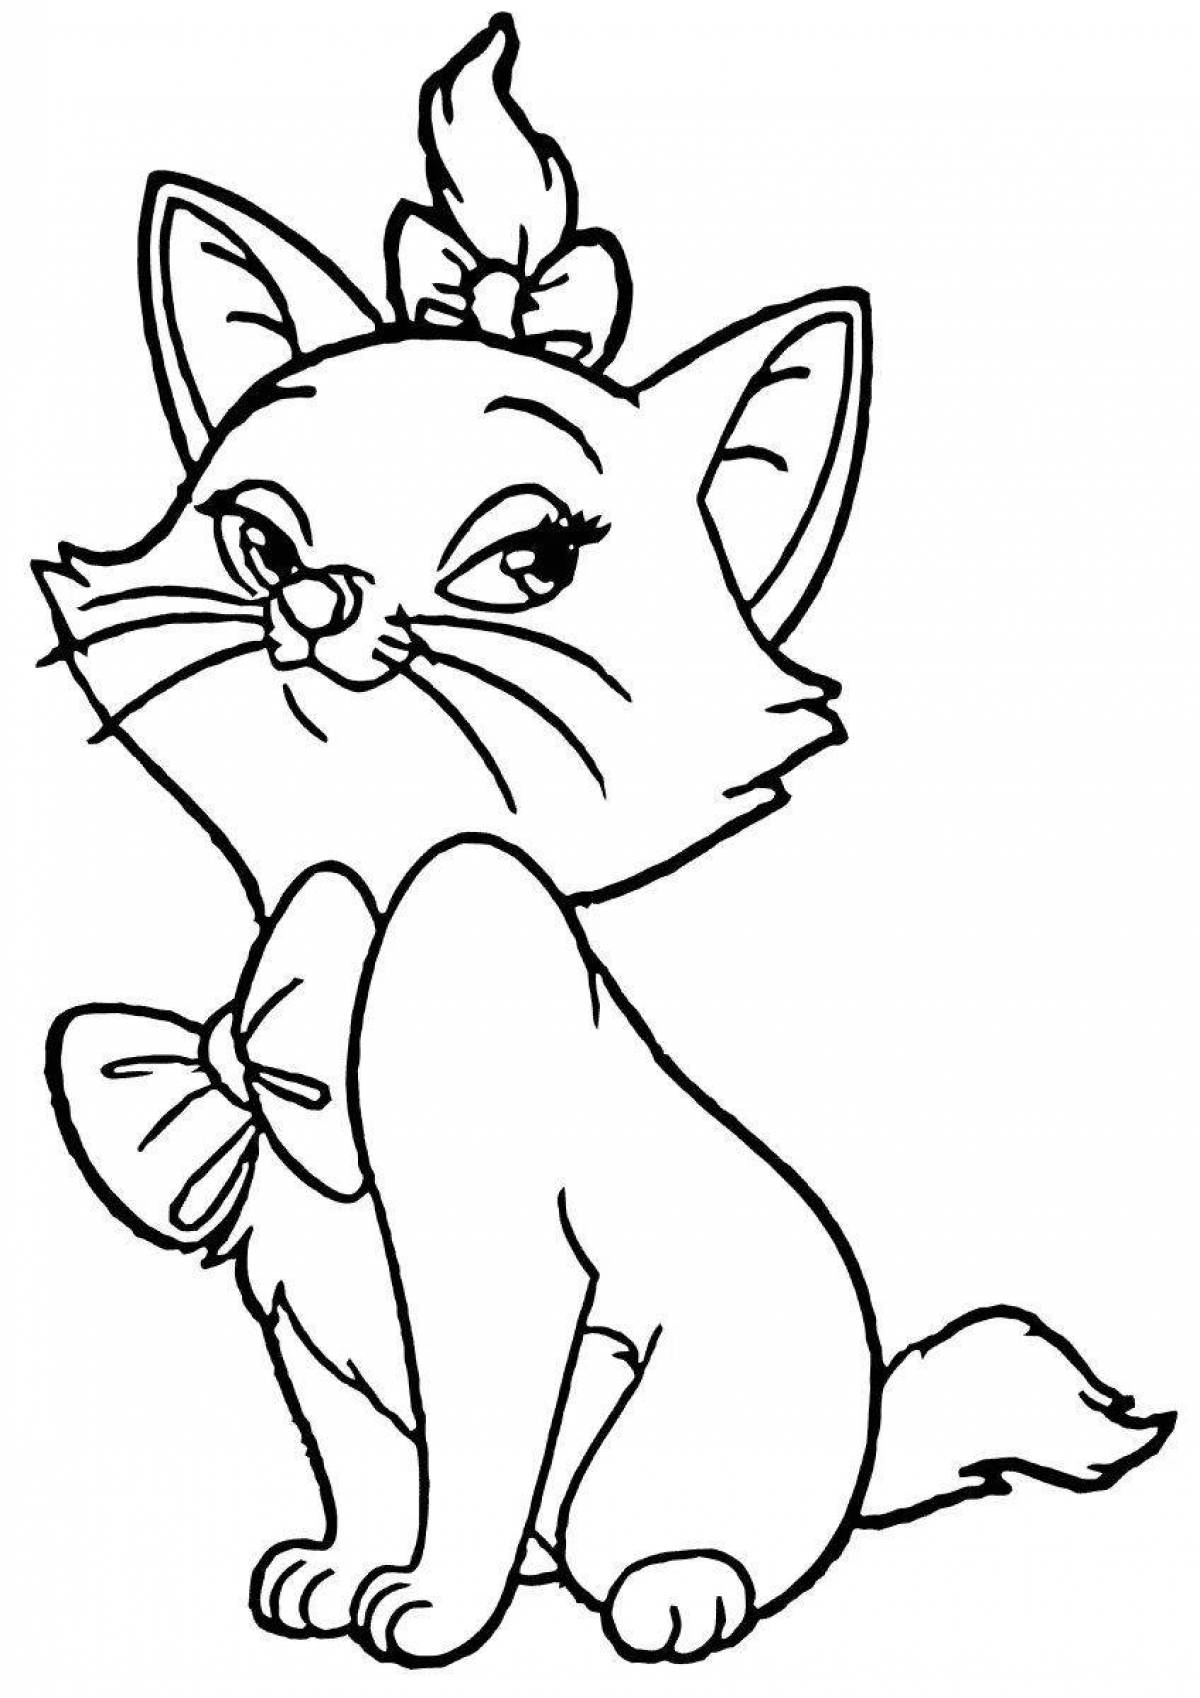 Coloring book shining marie kitty